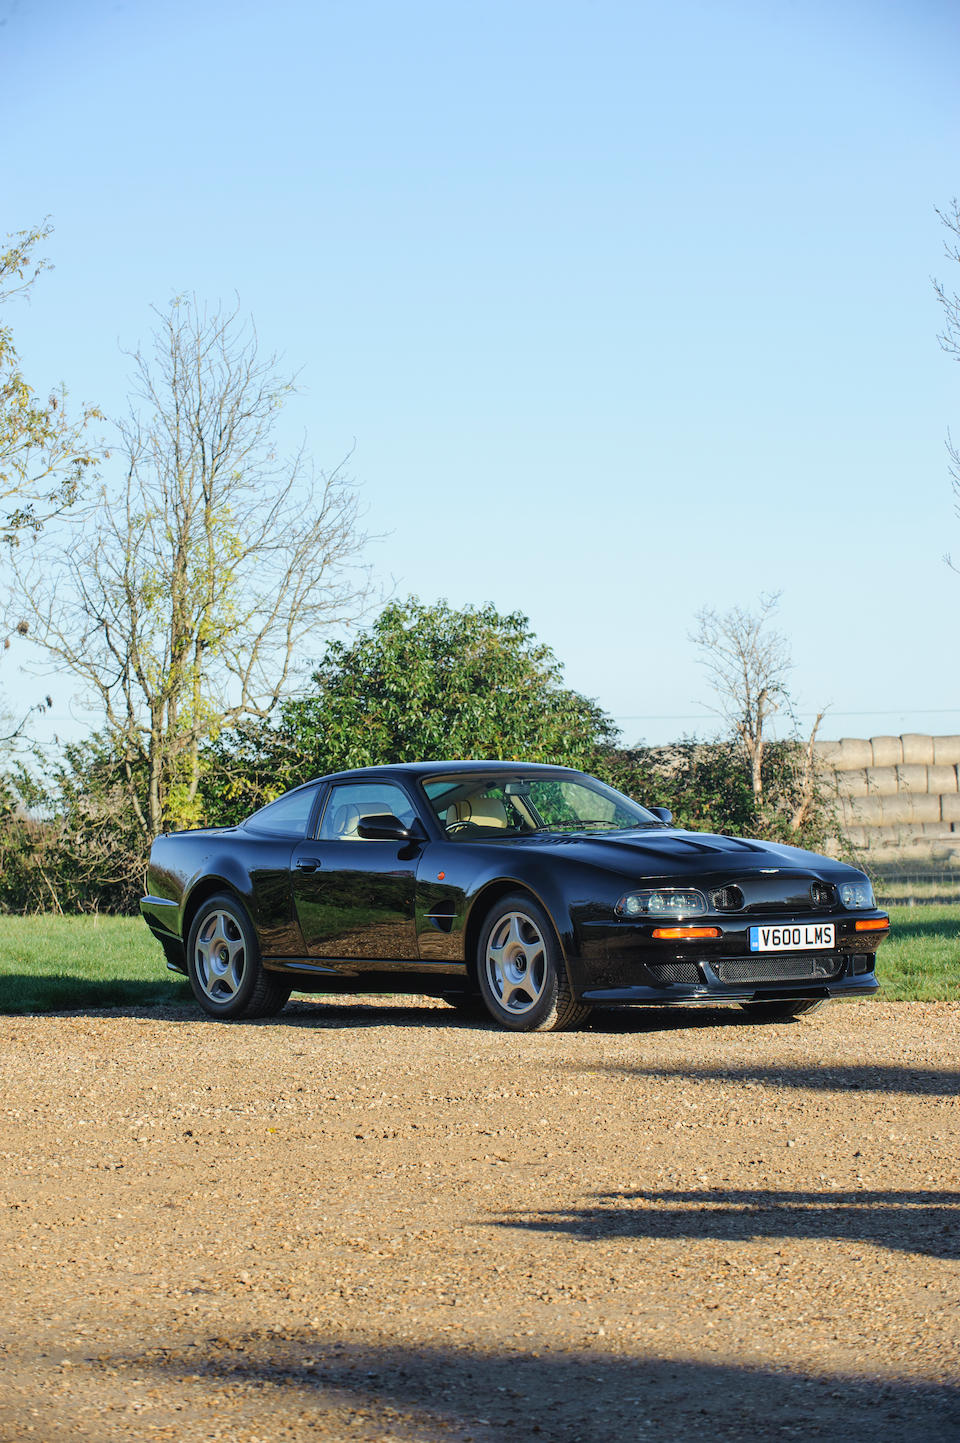 4,846 miles from new,2000 Aston Martin Vantage Le Mans V600 Coup&#233;  Chassis no. SCFDAM2S1XBR70265 Engine no. 59070265MLM